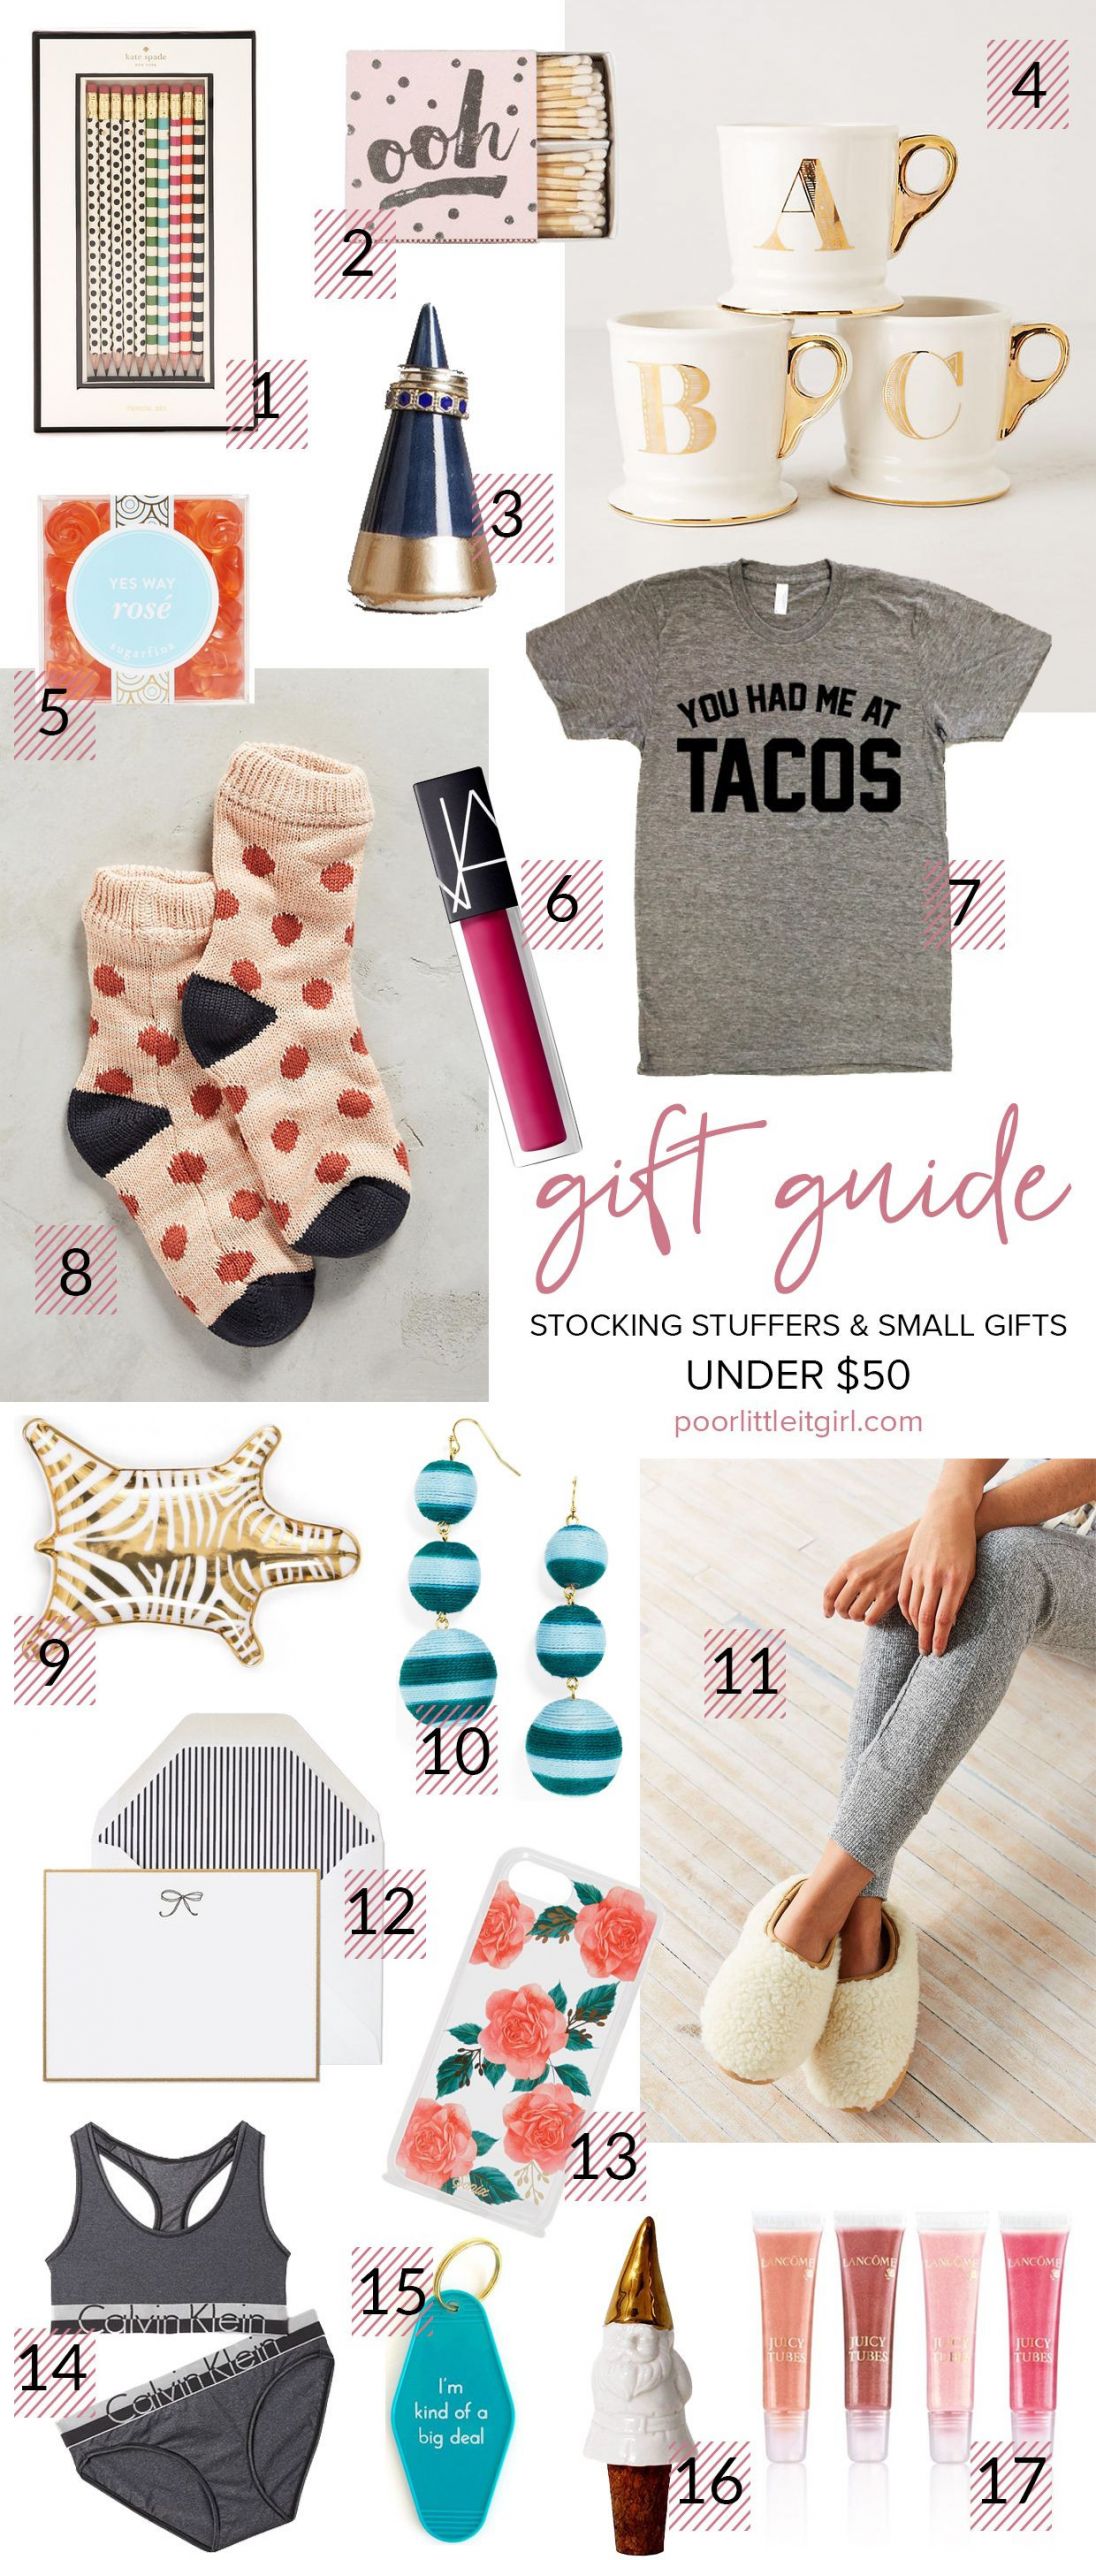 Girlfriend Gift Ideas Under $50
 Stocking Stuffers And Small Gifts Under $50 Gift Guide